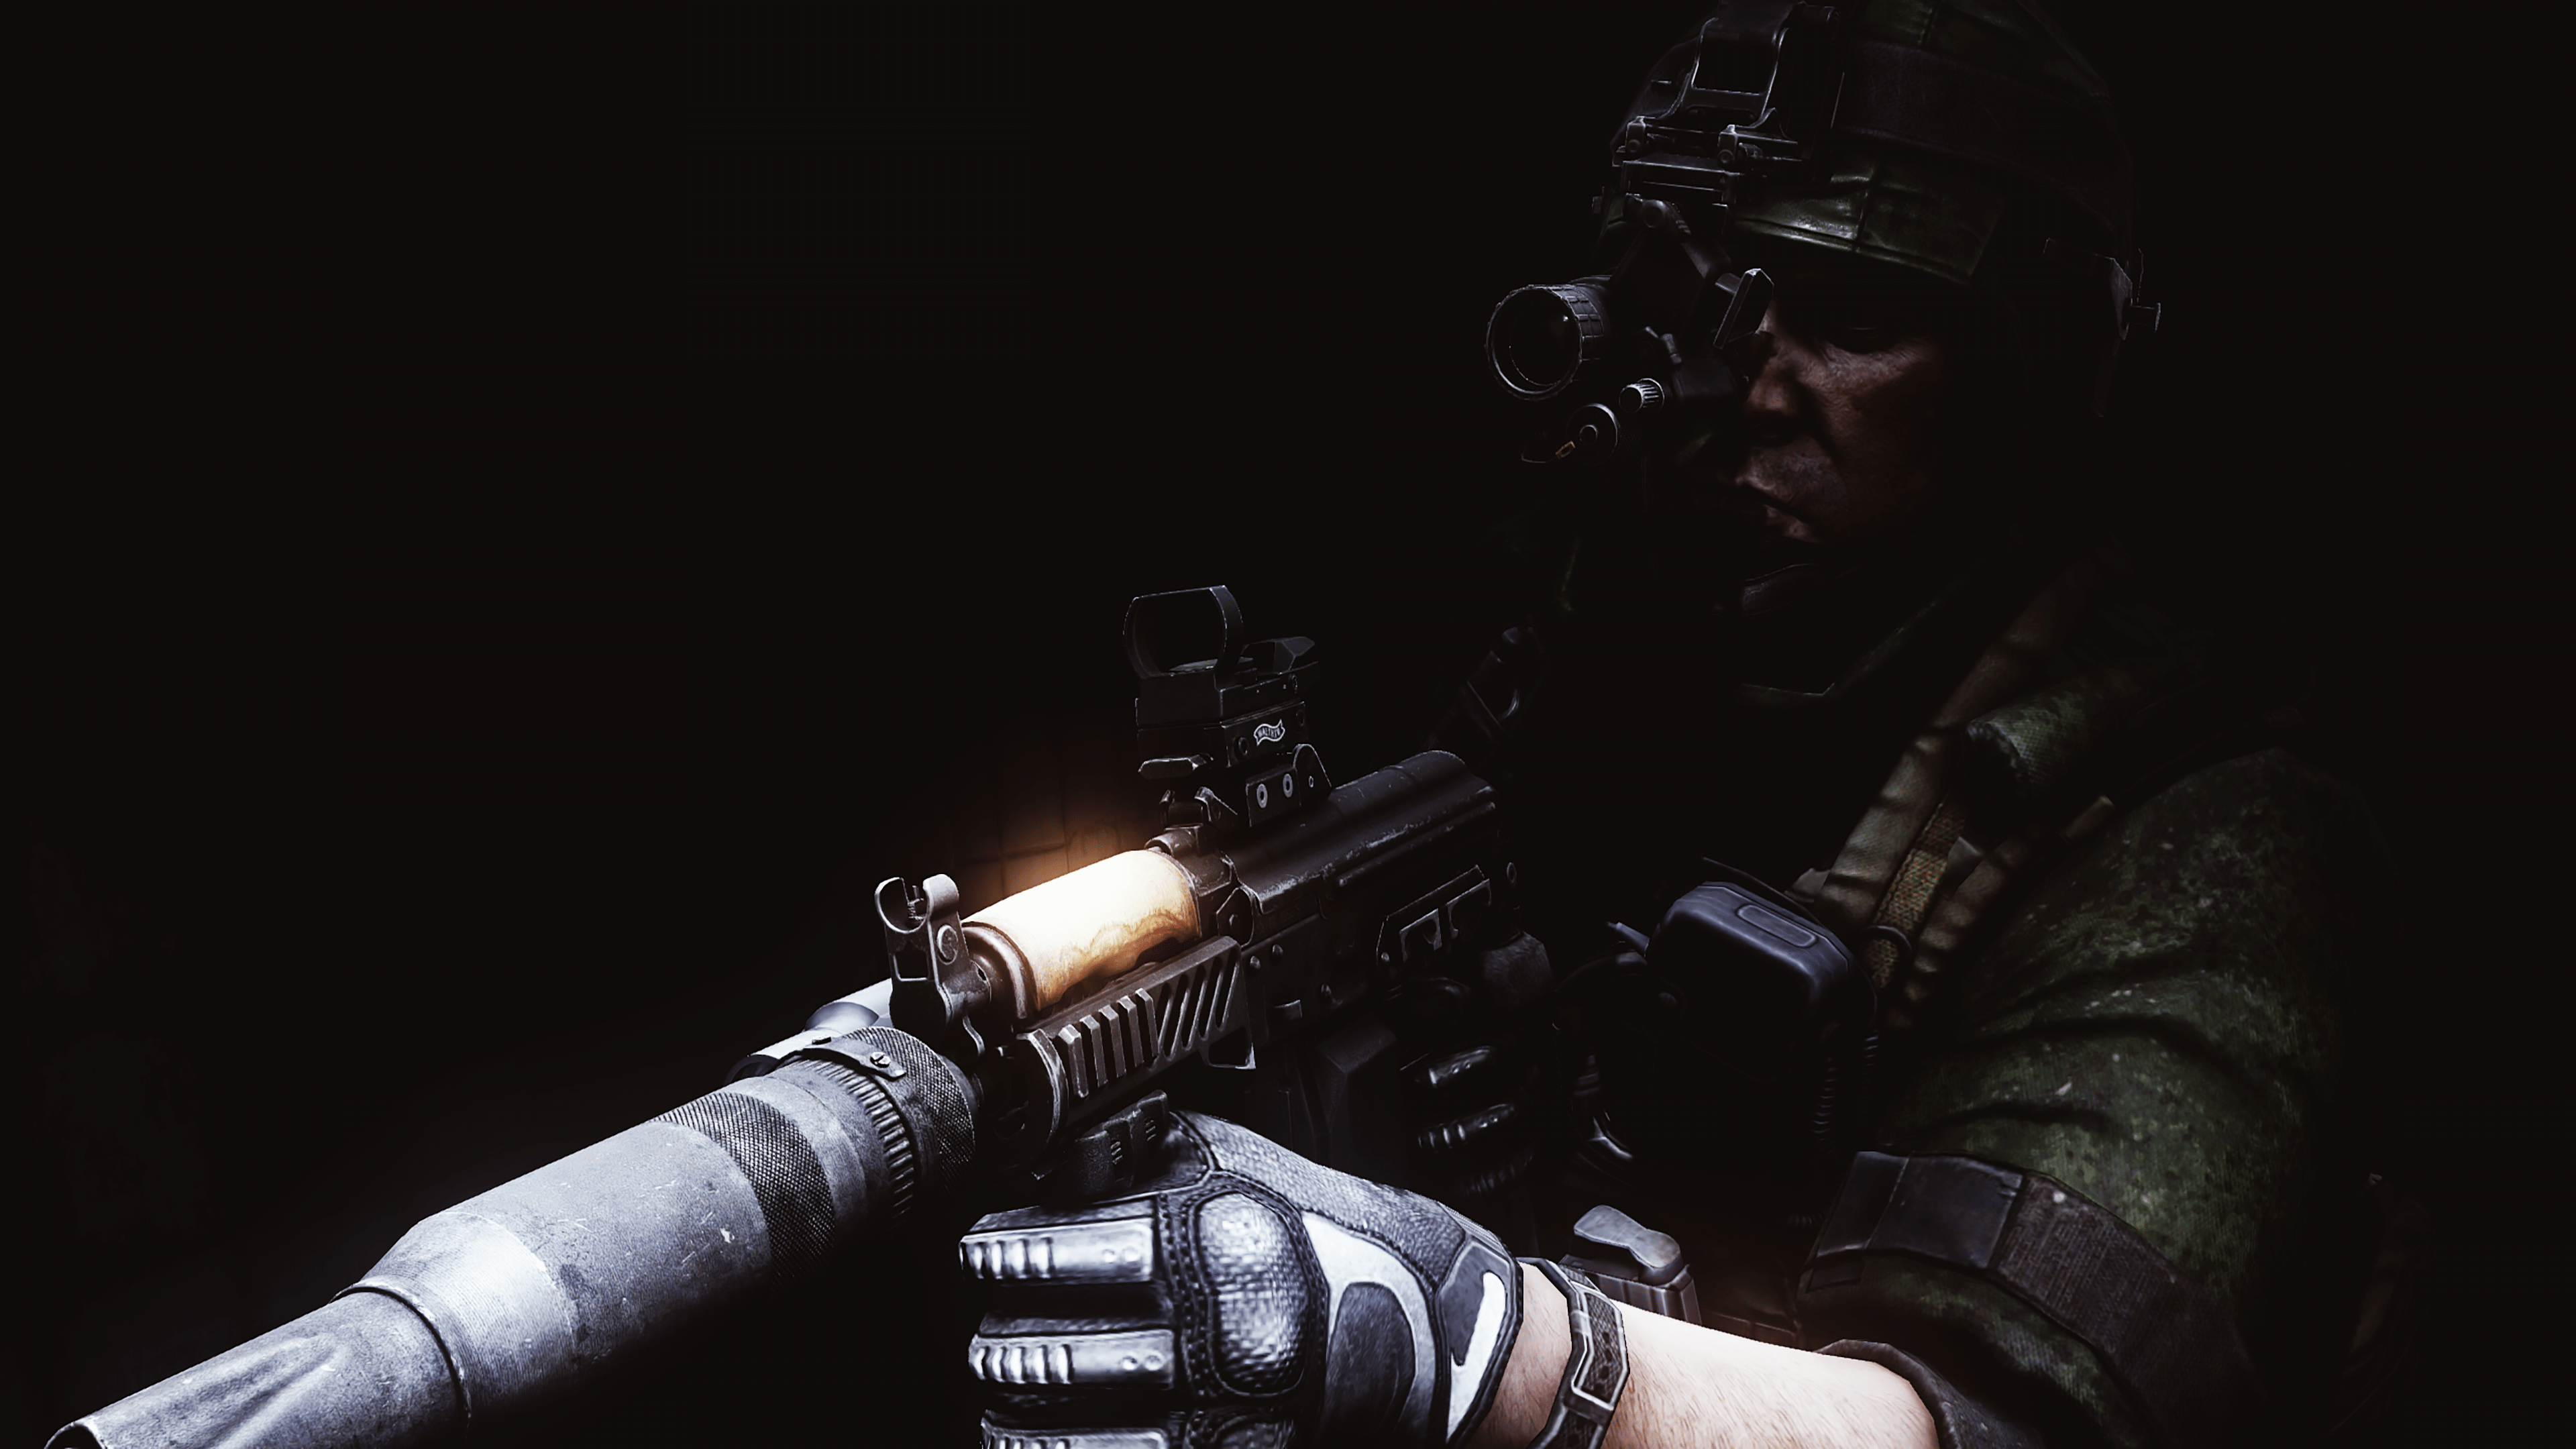 Video Game Escape From Tarkov HD Wallpaper by MadMadRush